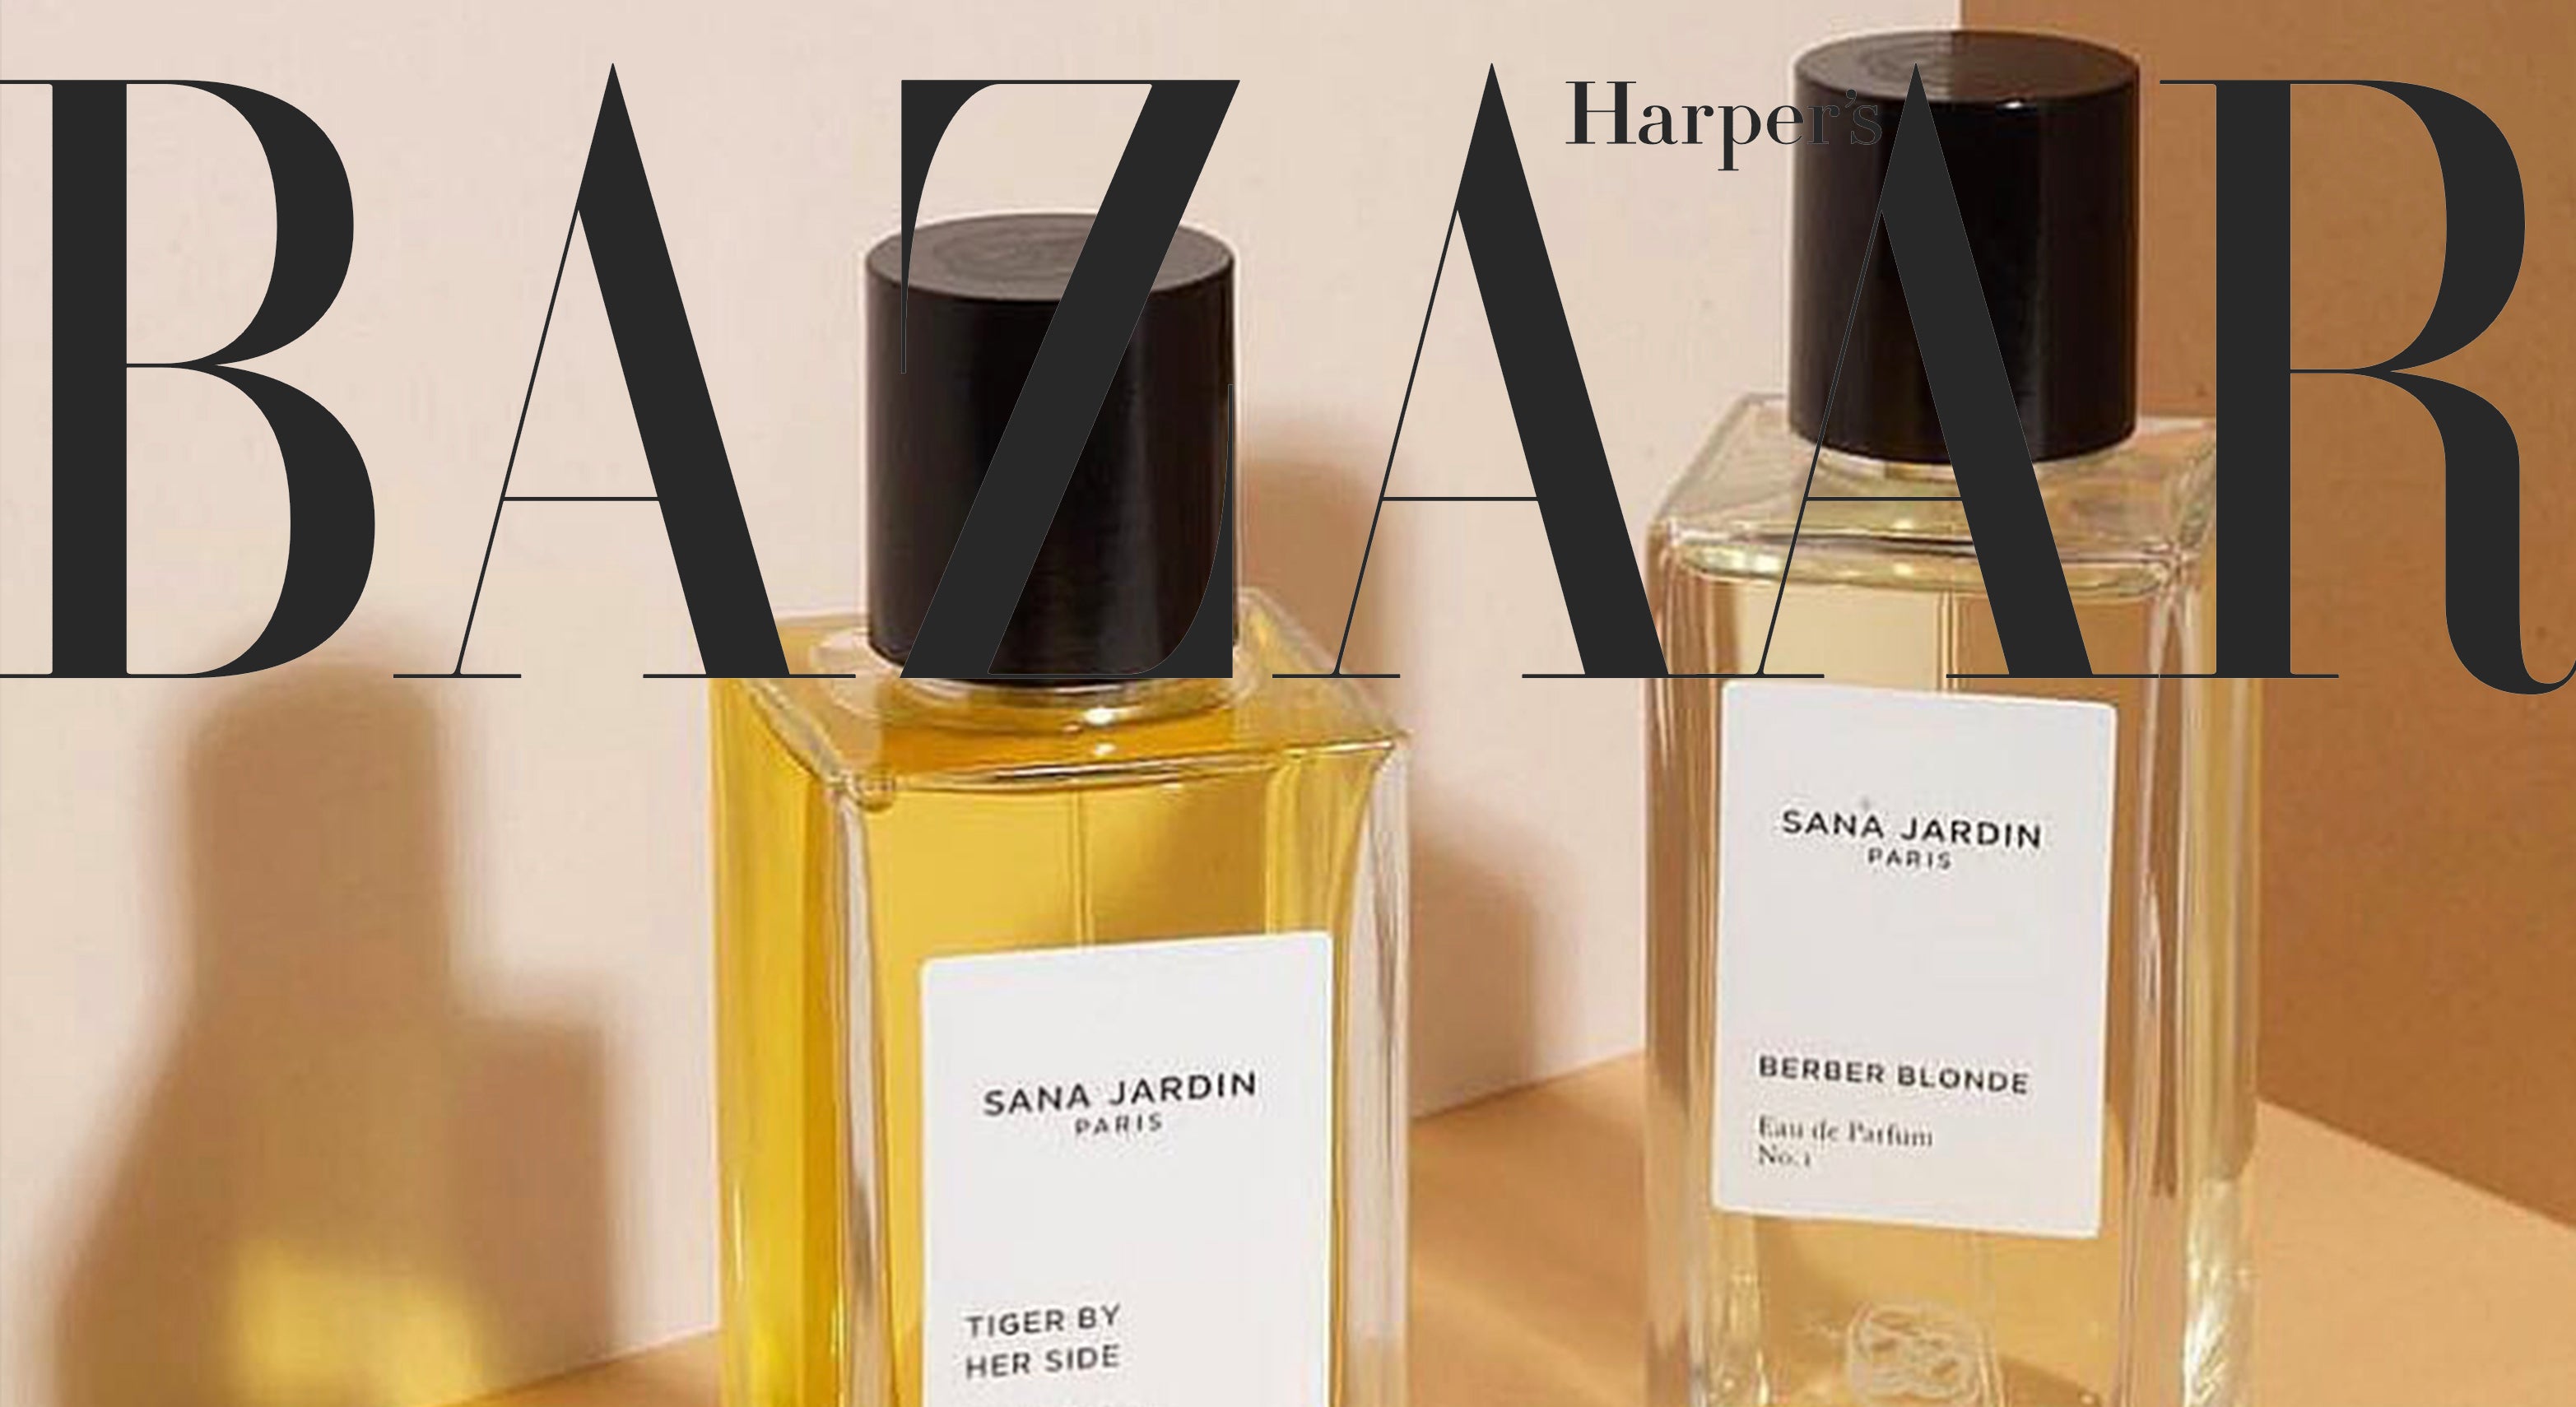 HARPERS BAZAAR: BEST BEAUTY BUYS THE SUPPORT THE SUSTAINABLE BEAUTY MOVEMENT